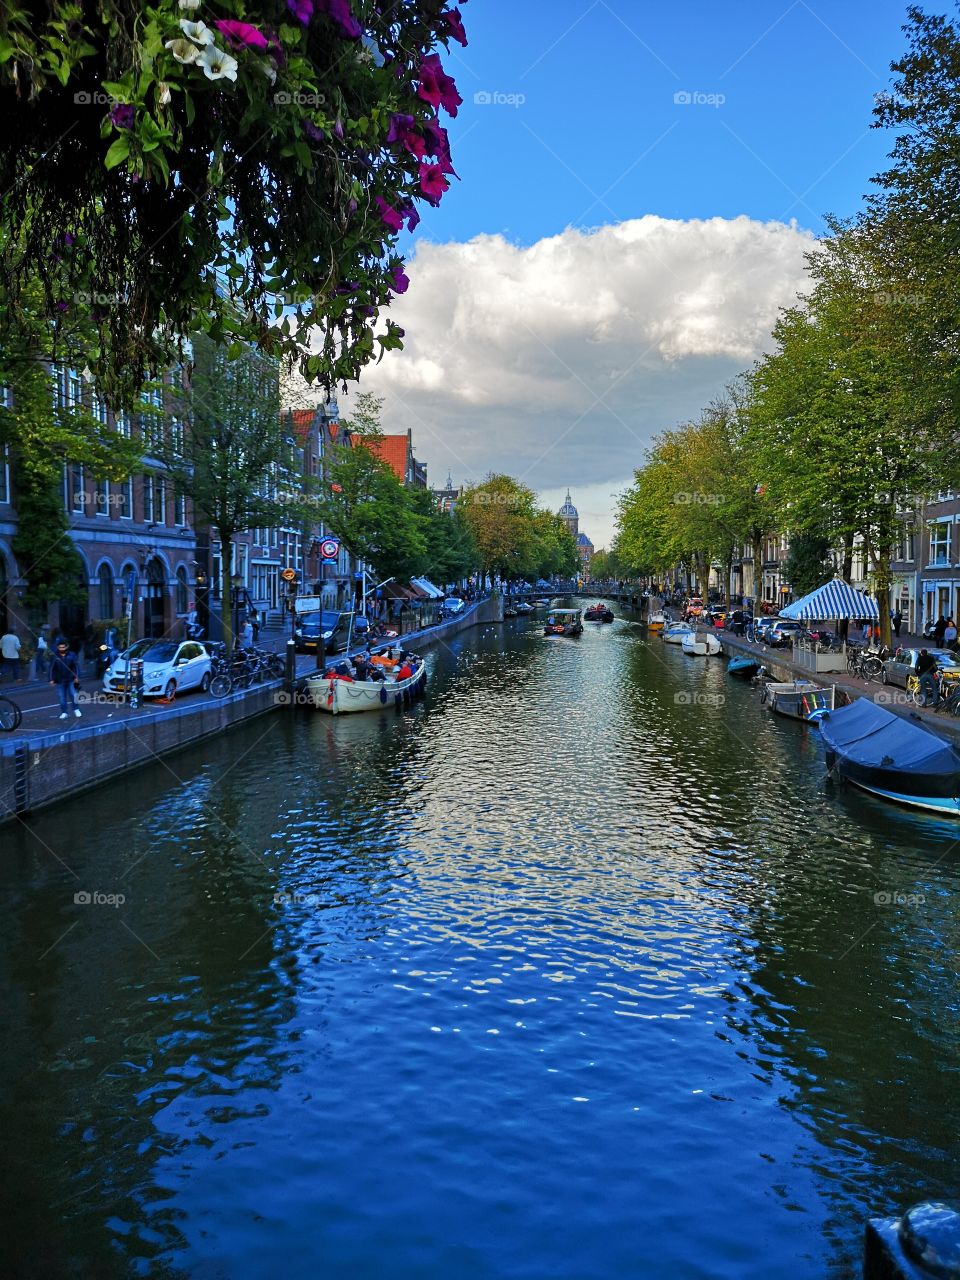 Amsterdam canal flowers